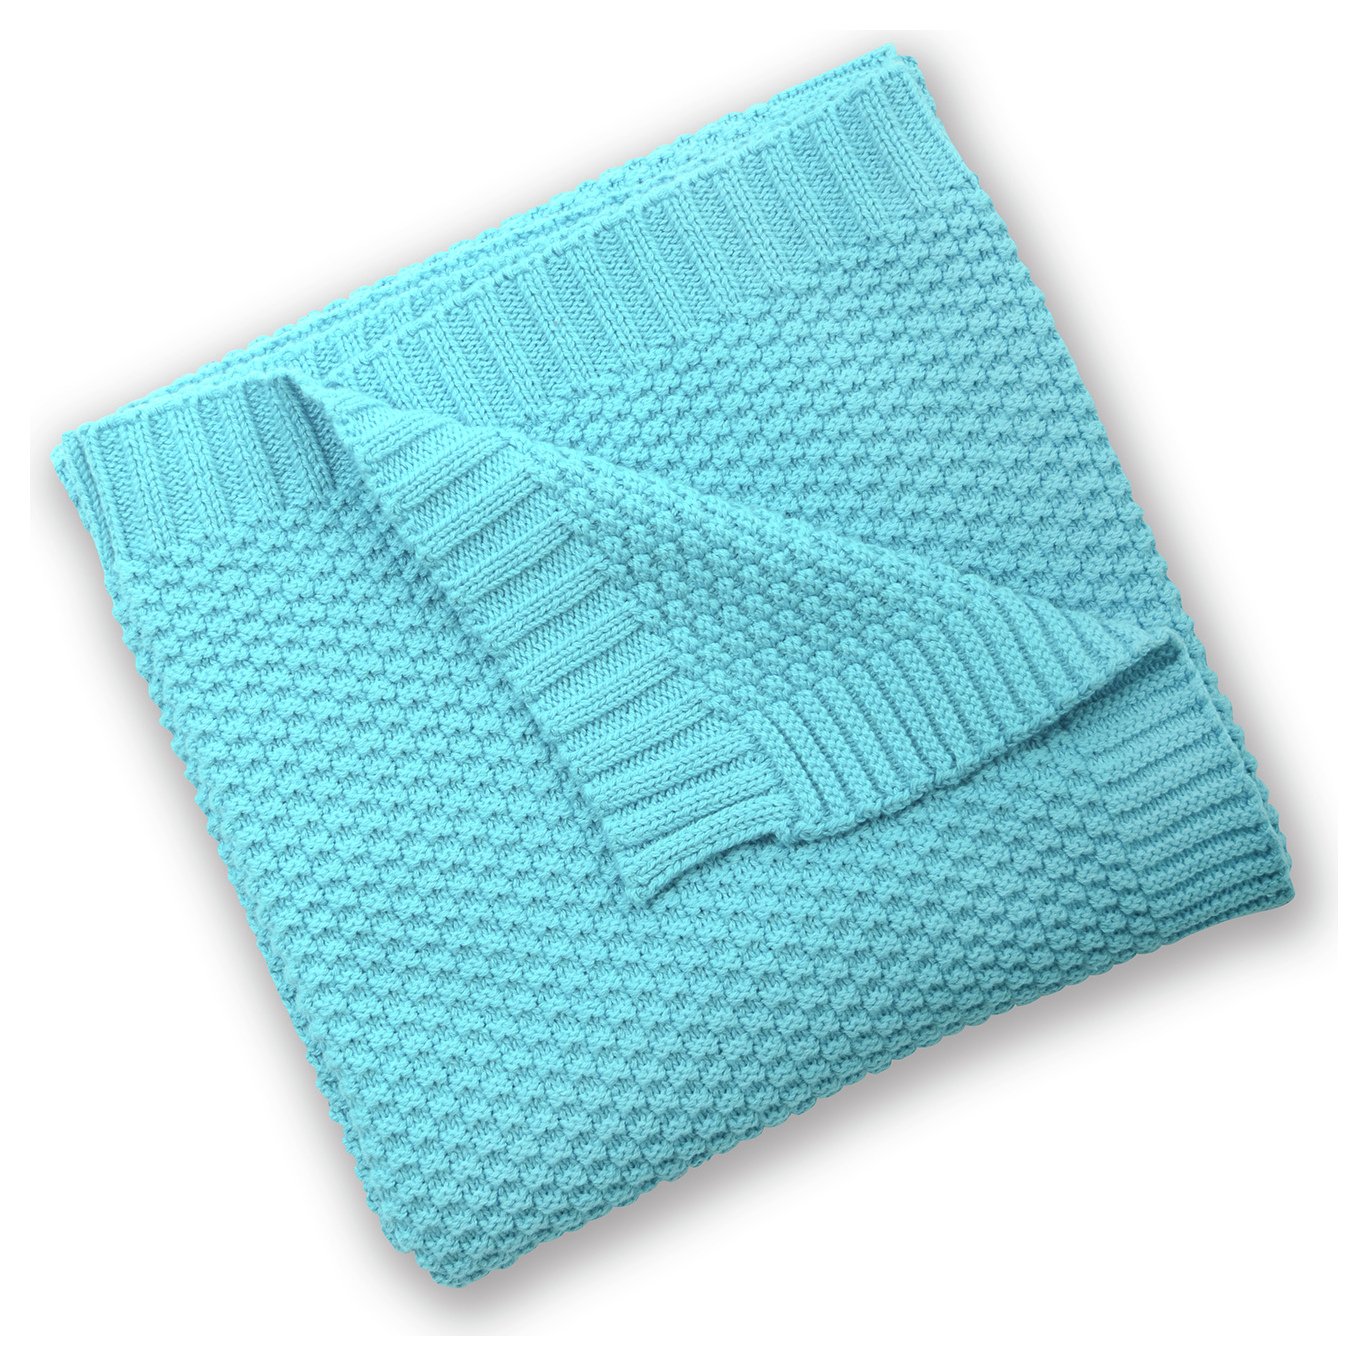 Silver Cloud - Cotton Blanket - Turquoise Review